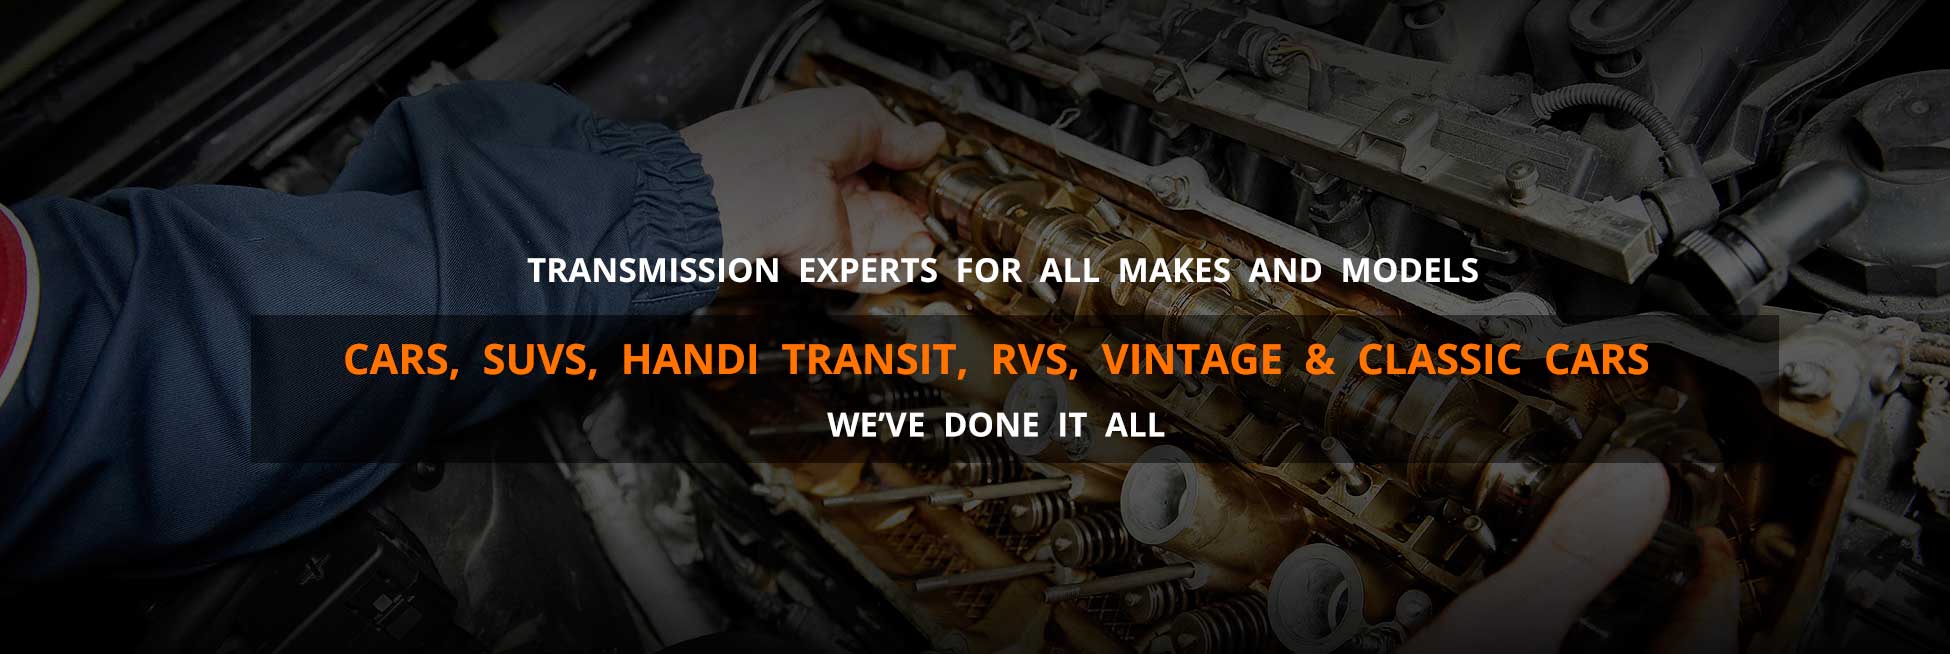 Transmission Expert for all makes and models